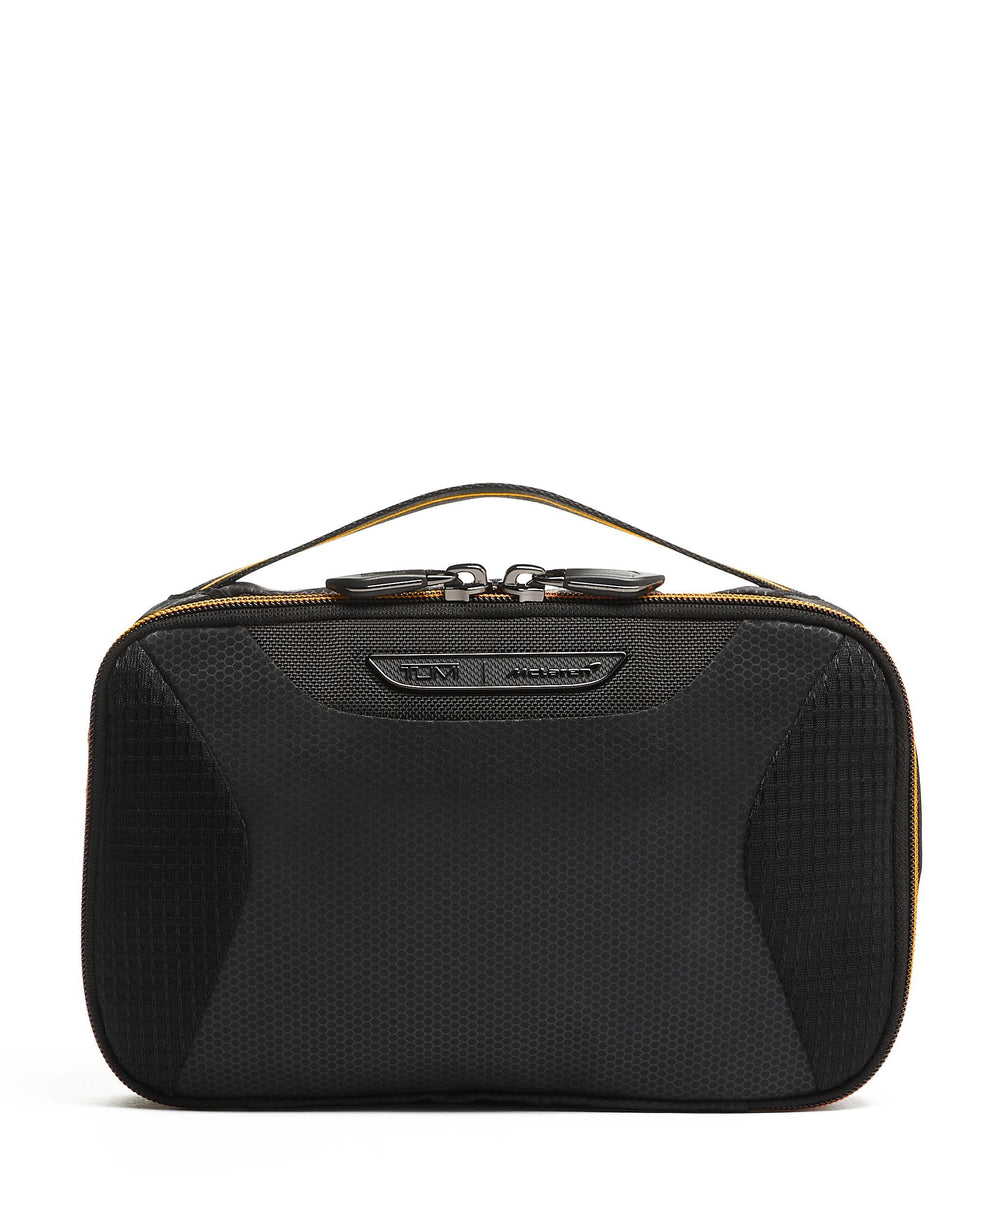 Orbit Small Packing Cube TUMI I McLaren Collection